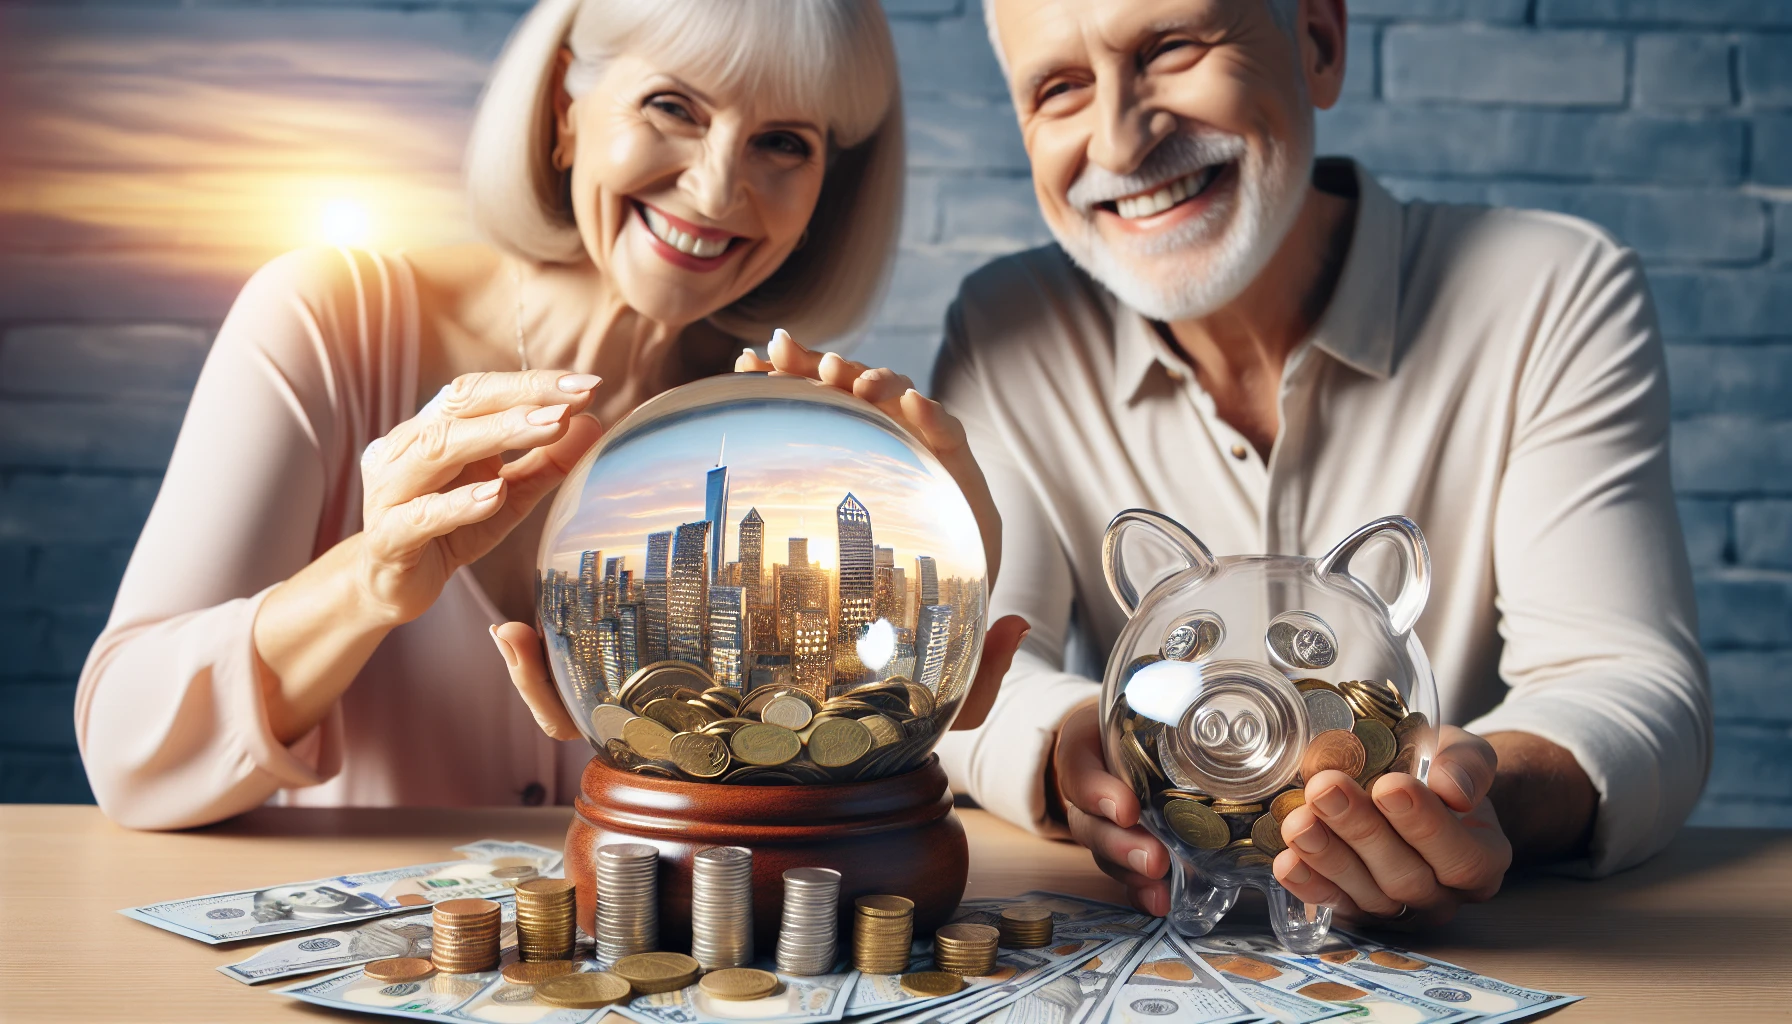 Retirement savings and investment concept with cityscape background